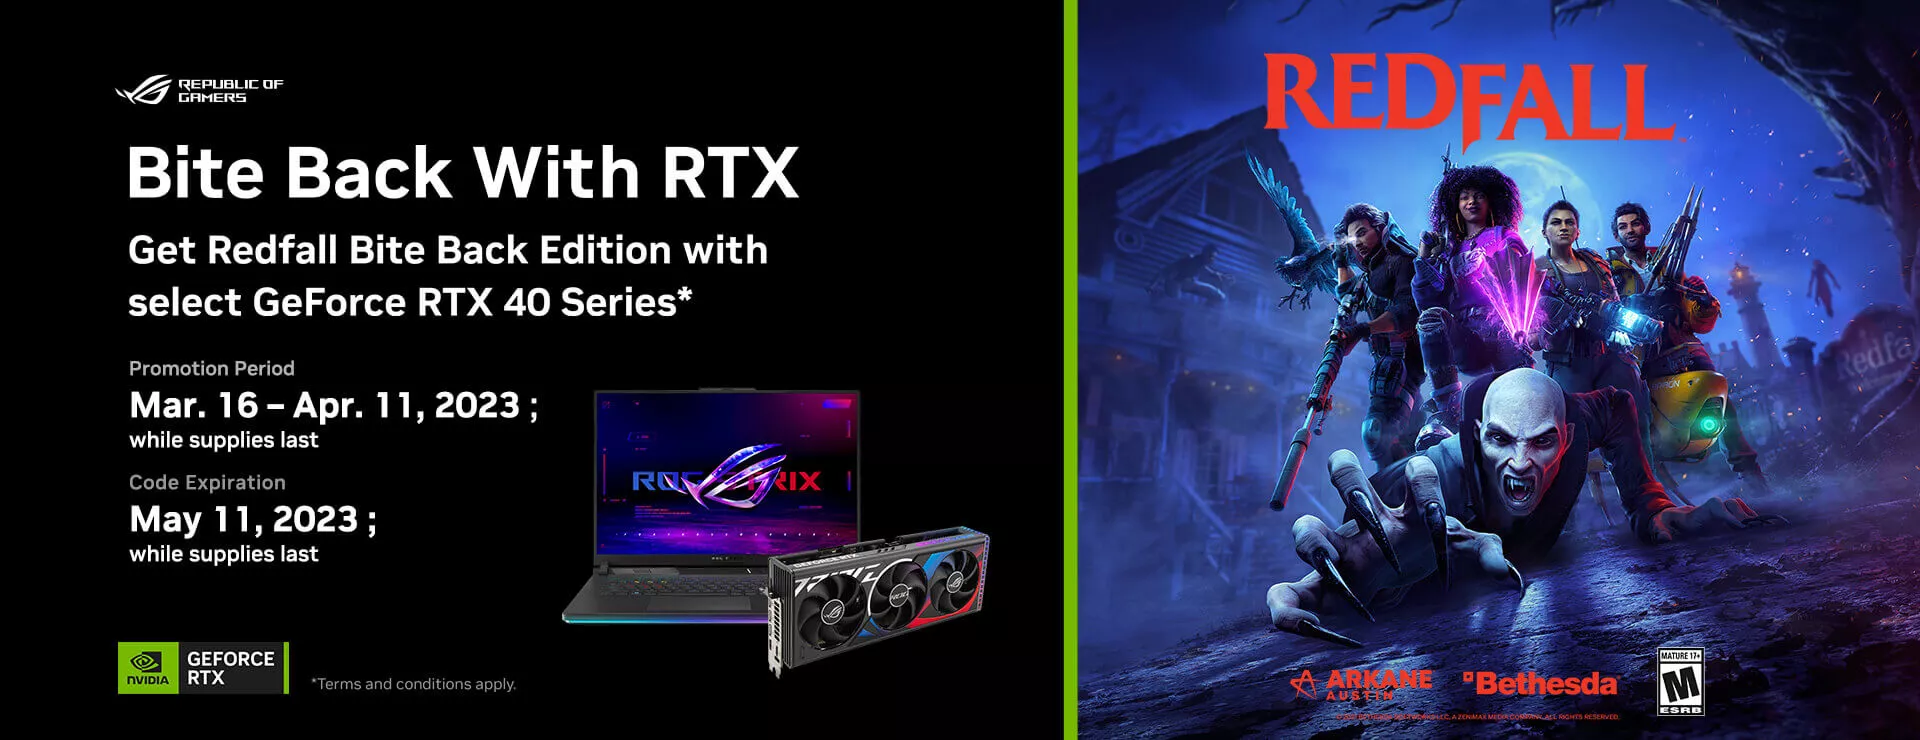 The banner has NVIDIA RTX game bundle offers and duration info with image of a ROG laptop and graphic cards image on the left. Bundle offers users who purchase ROG products with selected RTX40 series GPU will get a free copy of Redfall Bite Back Edition.   On the right side of the banner is the Redfall Bite Back Edition Key Visual.